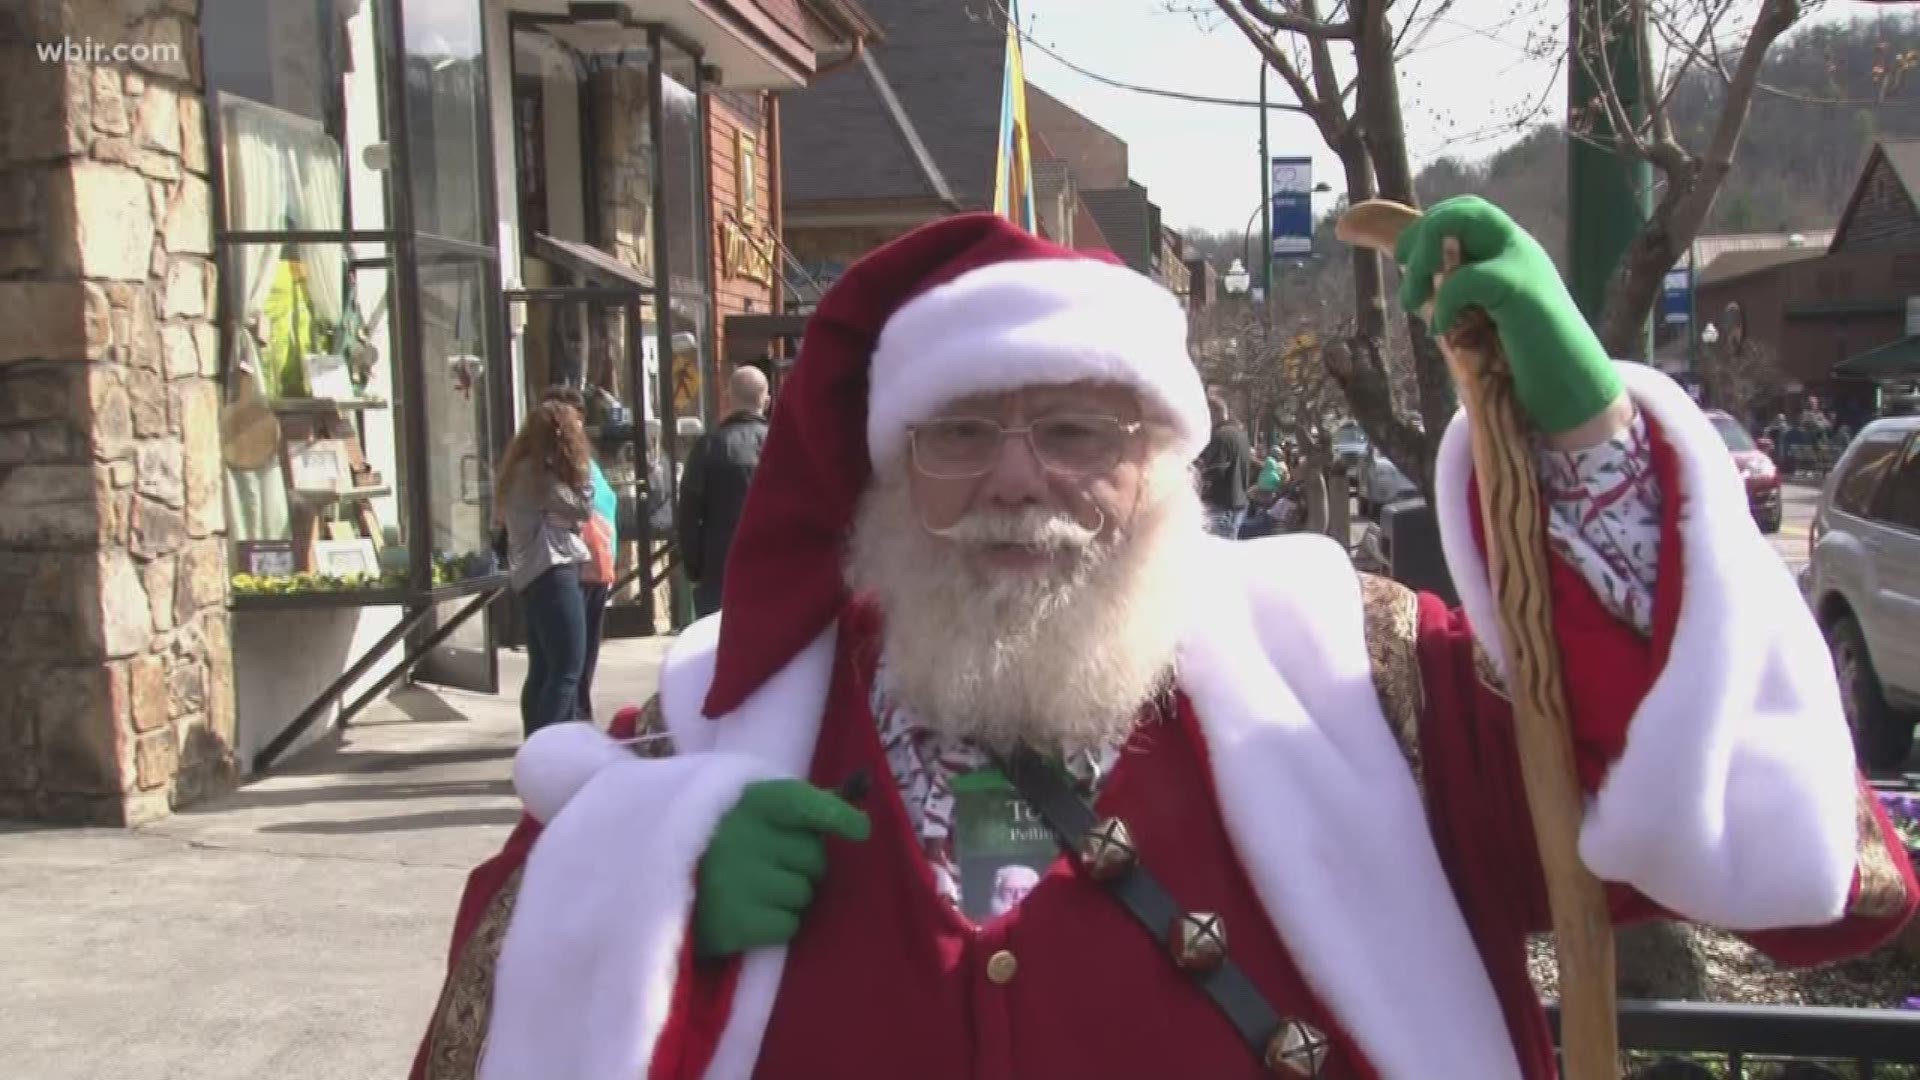 Gatlinburg has been a special place for professional Santas for ten years.